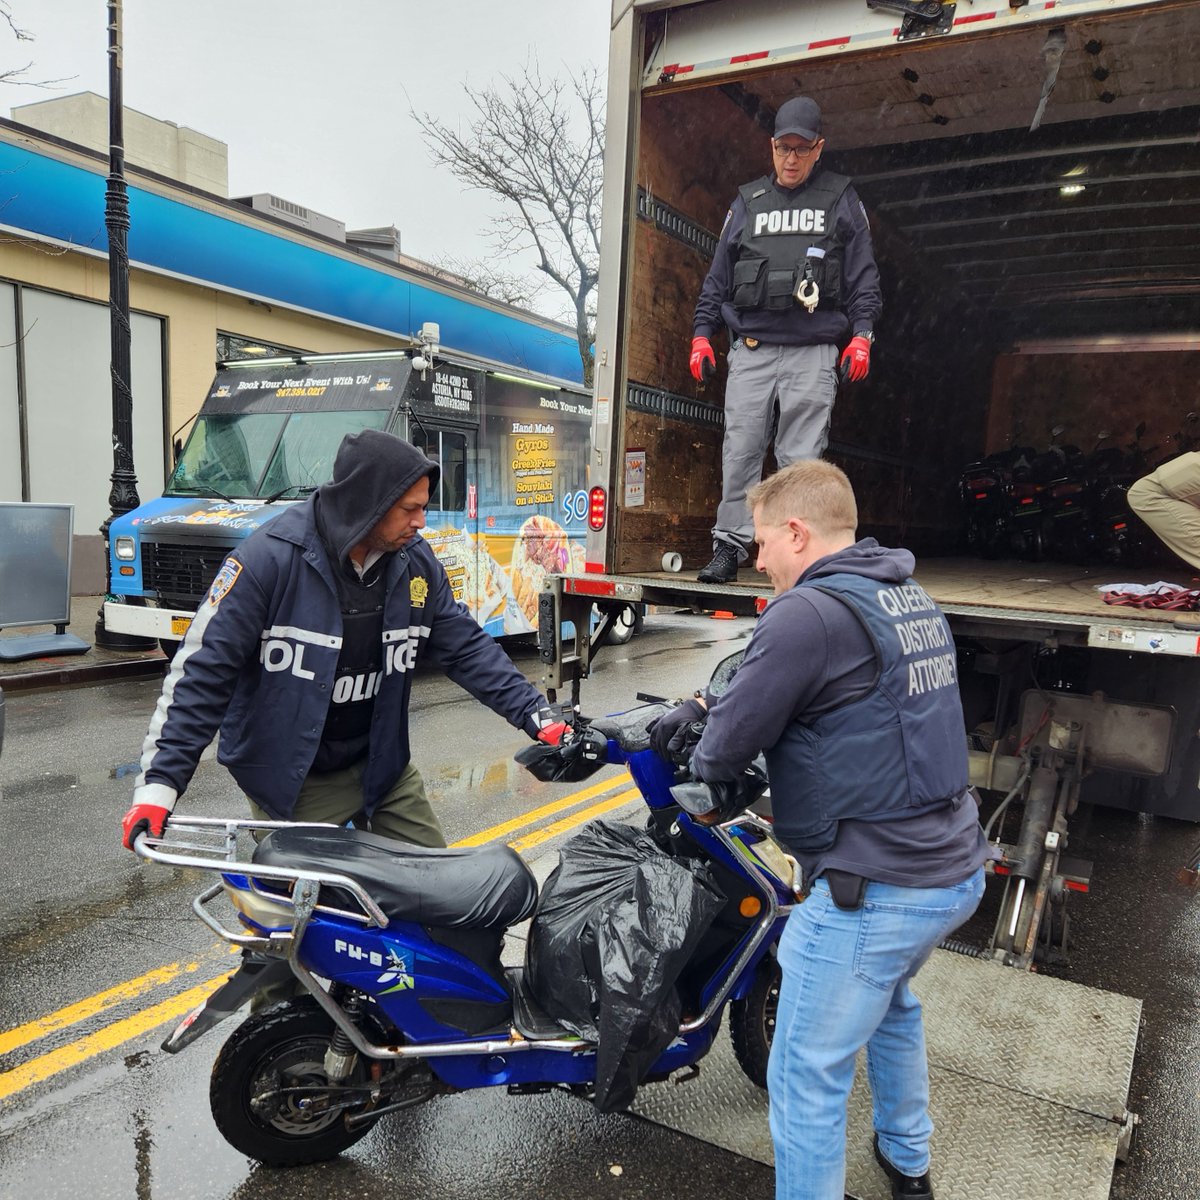 Following up on 250 scooters confiscated last month, we teamed up with @NYPD112Pct to seize an additional 40 scooters illegally parked along Austin St and Queens Blvd. Nearly all were unregistered and uninsured.